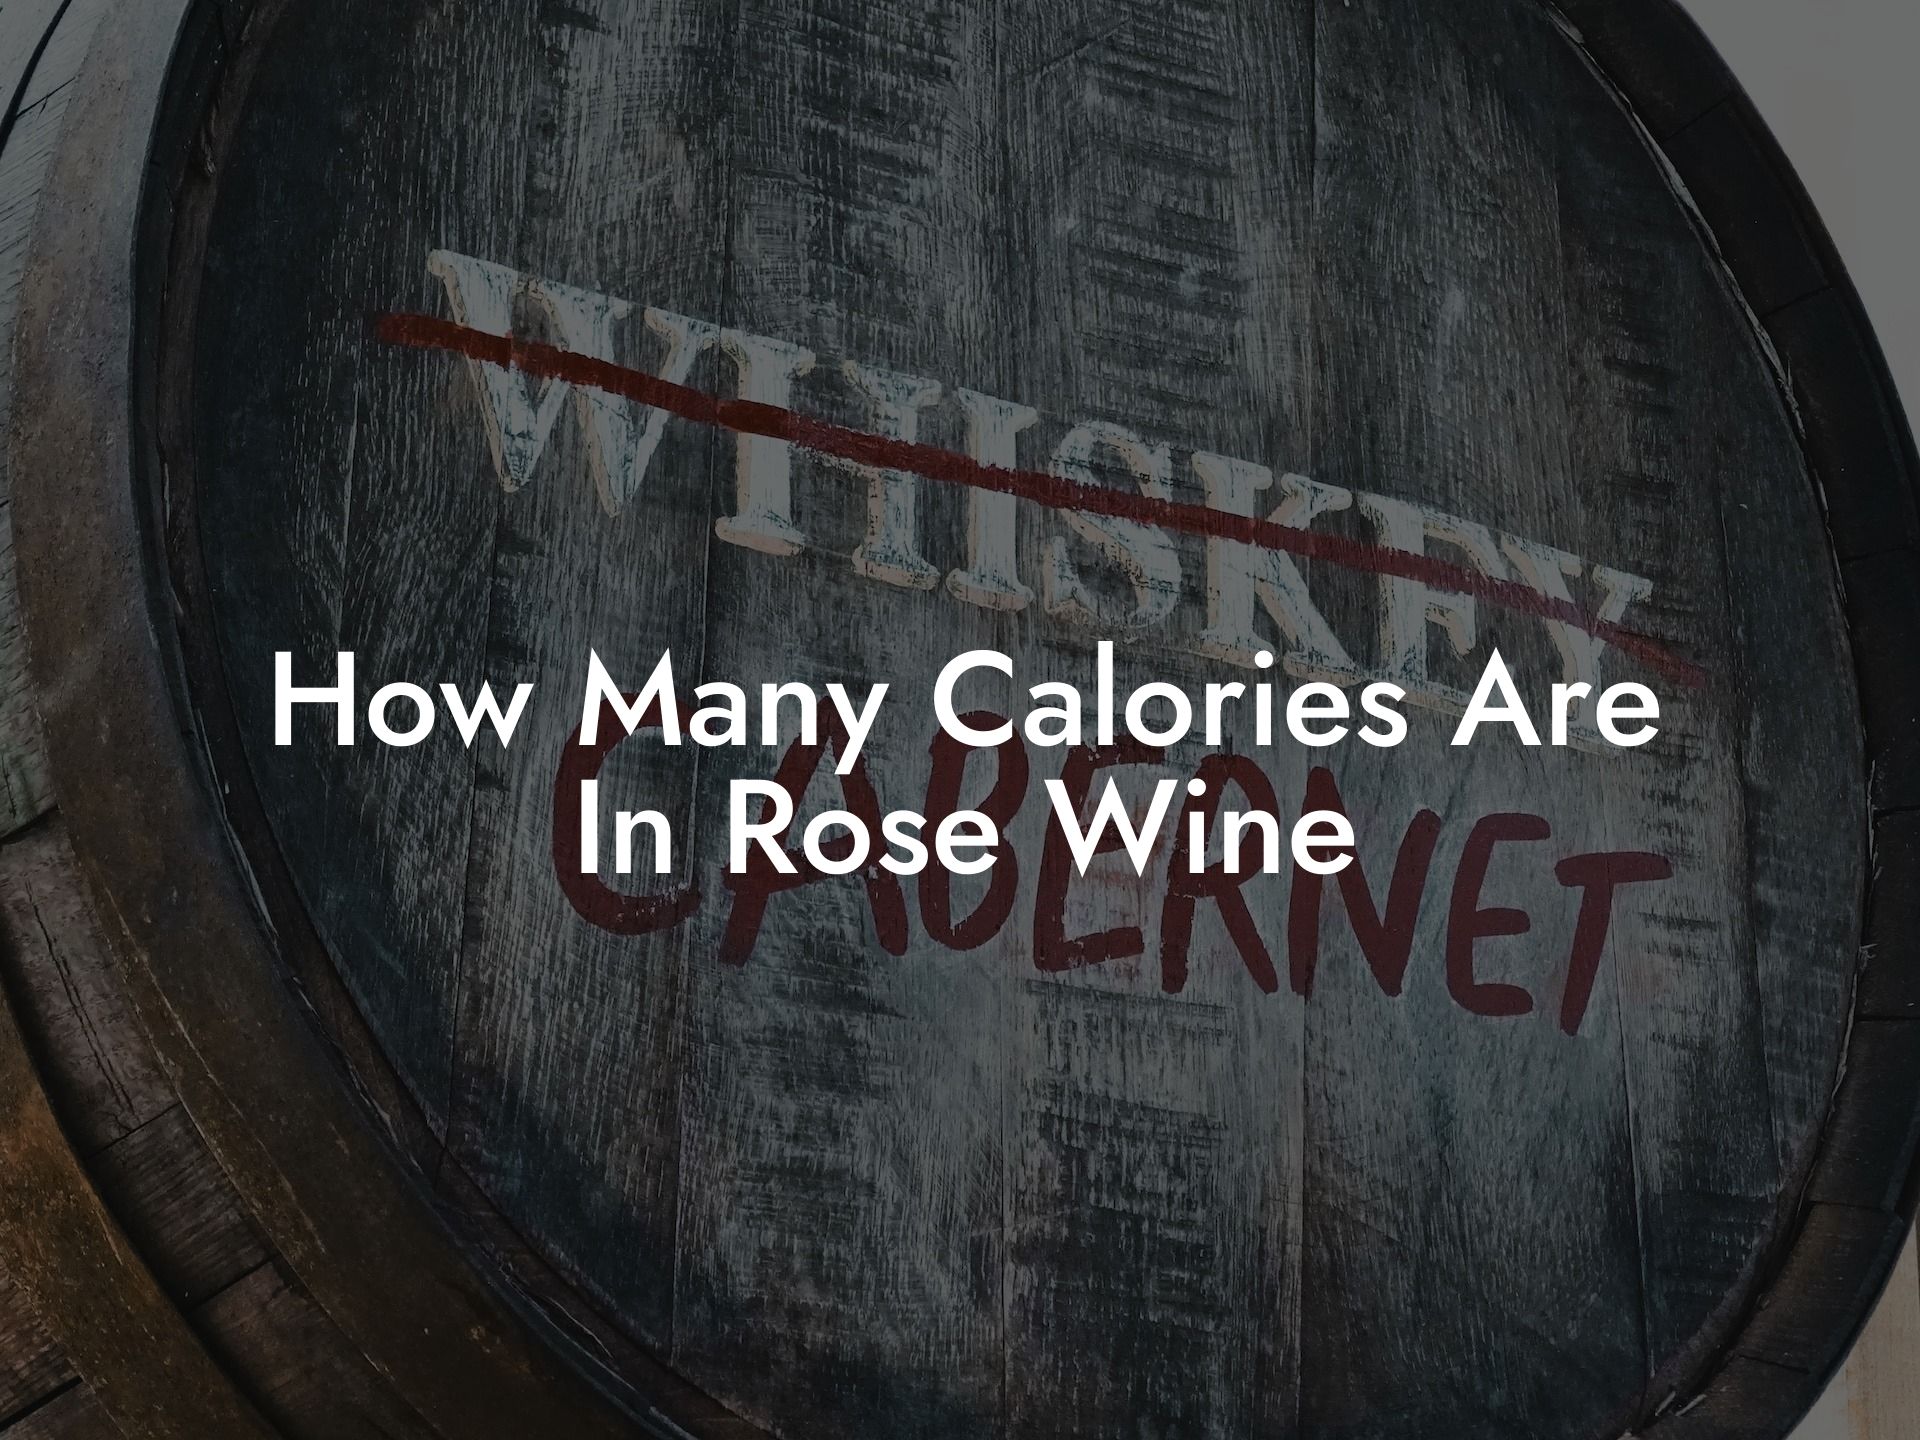 How Many Calories Are In Rose Wine